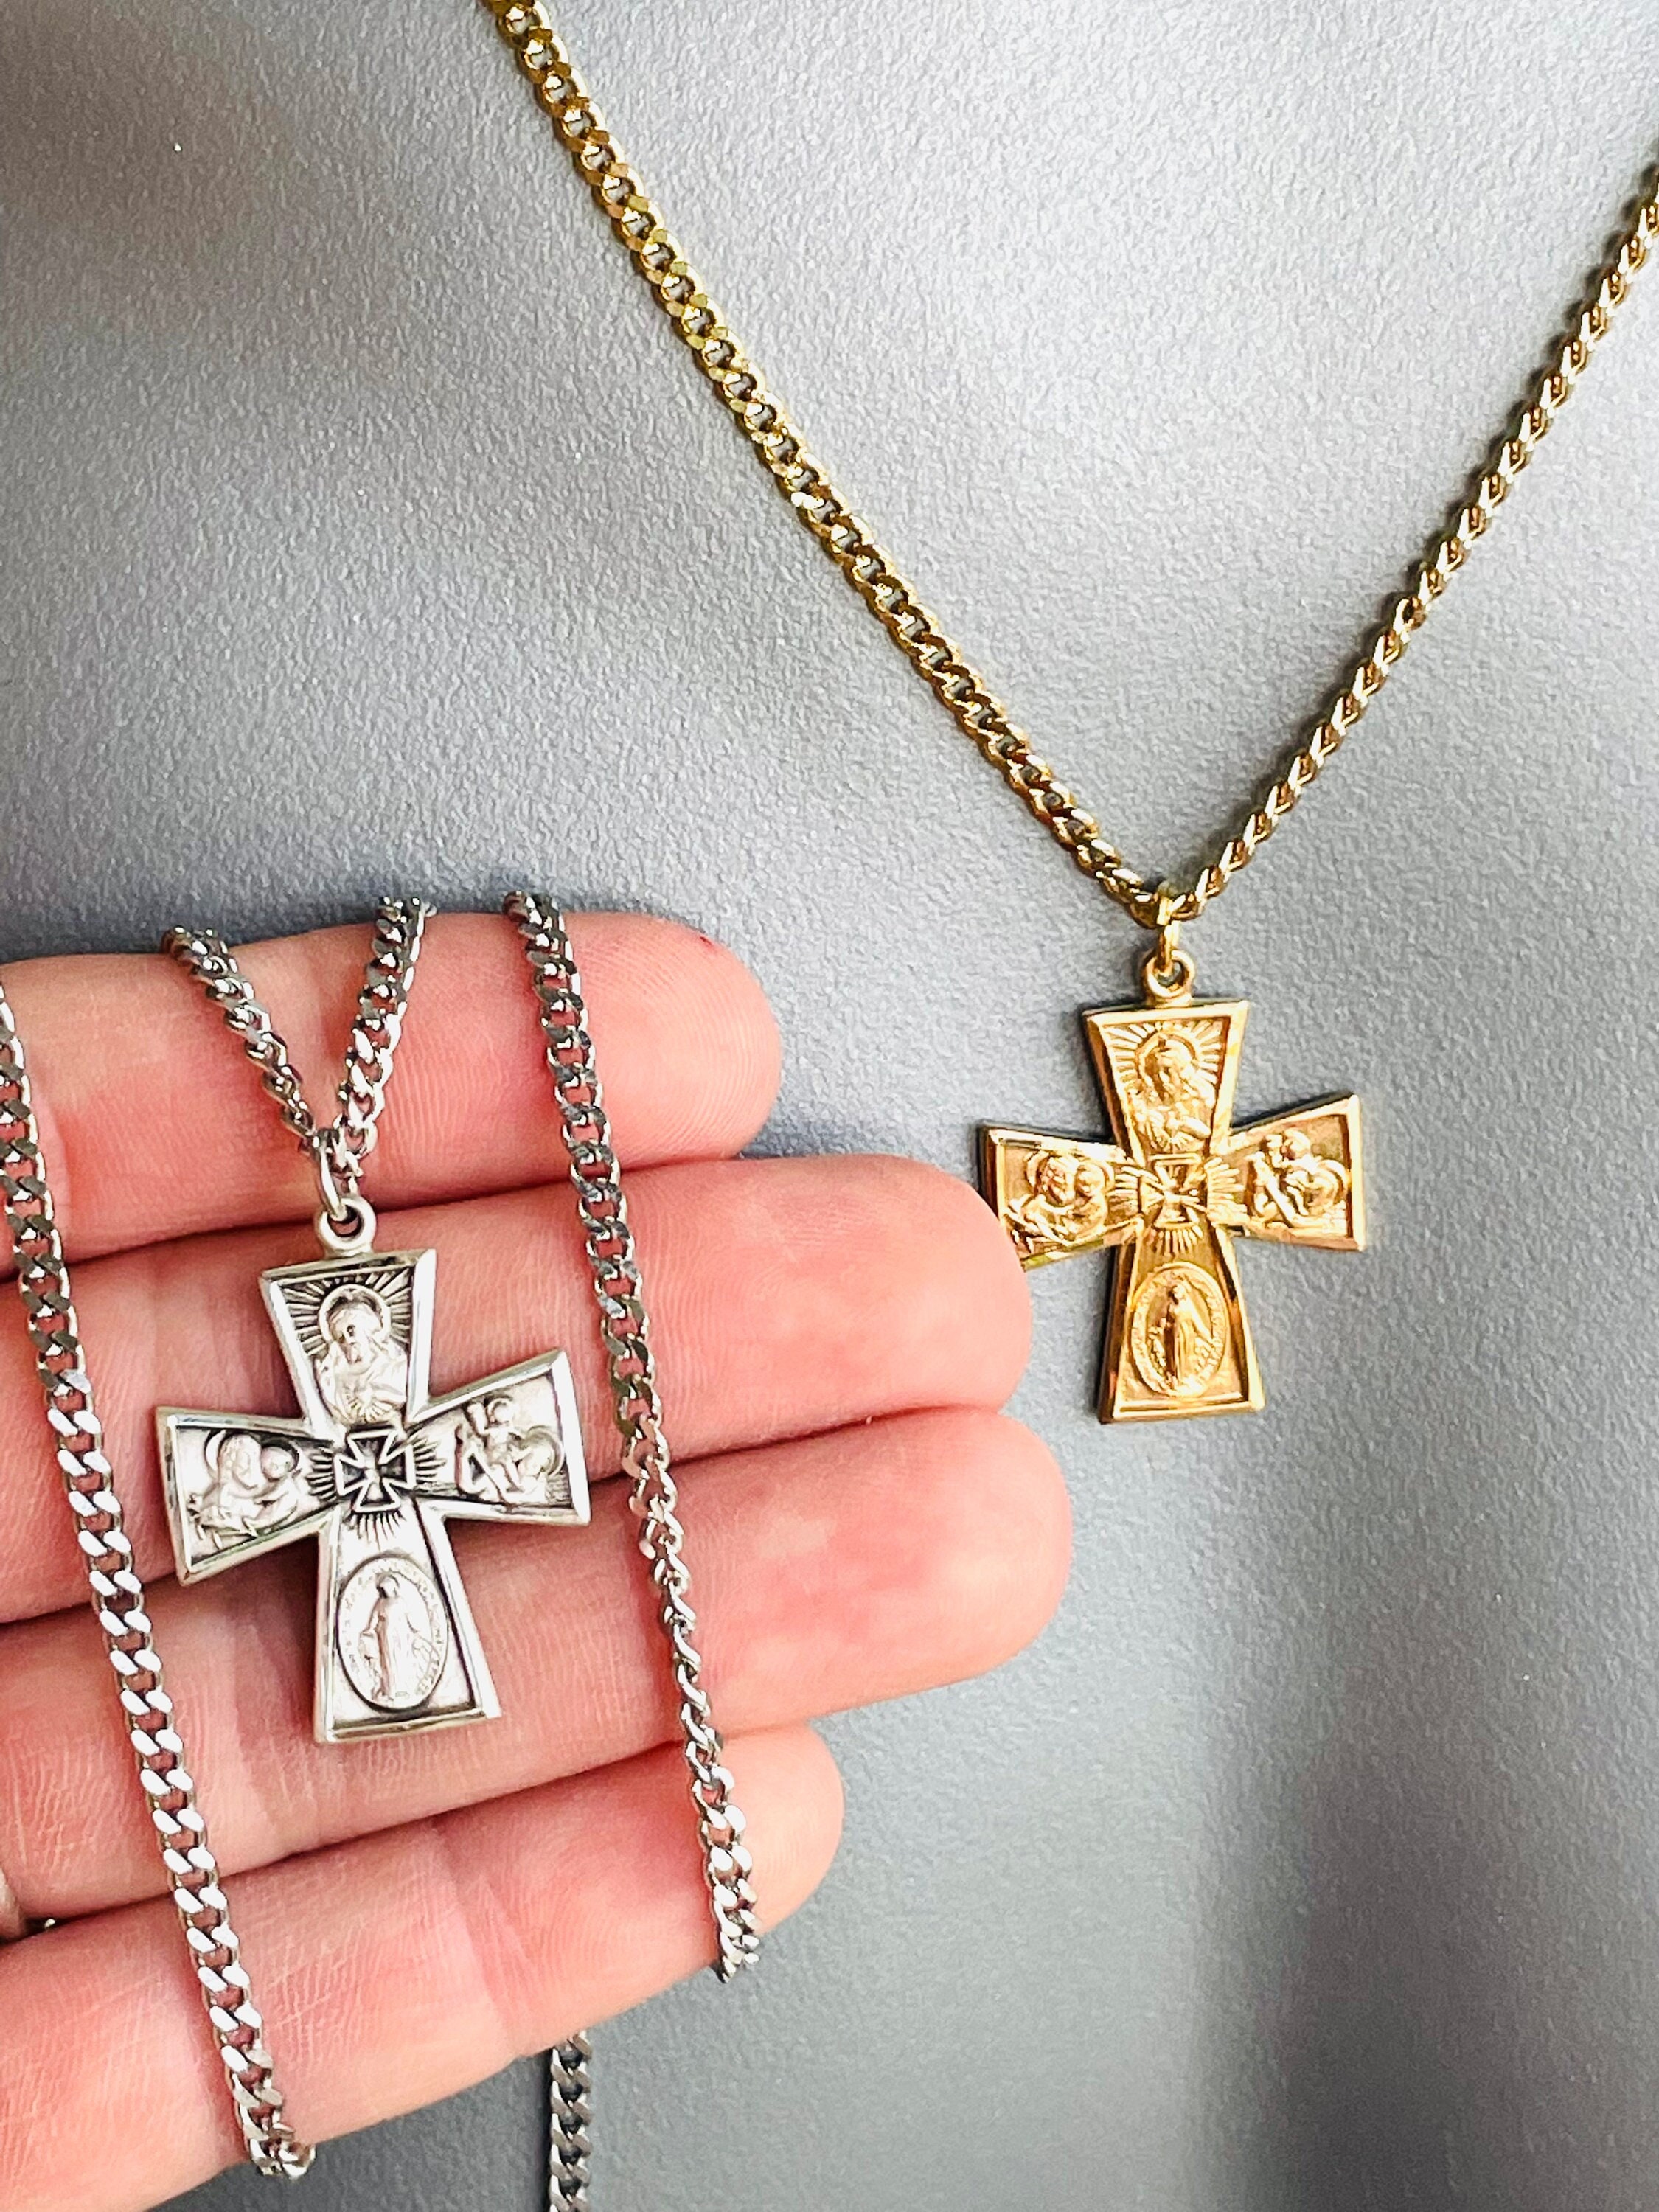 Gold Cross Jesus Cross Pendant With Bible Religious Catholic Crucifix Jesus  Design For Mens Jewelry Gift 230701 From Shen012001, $6.84 | DHgate.Com